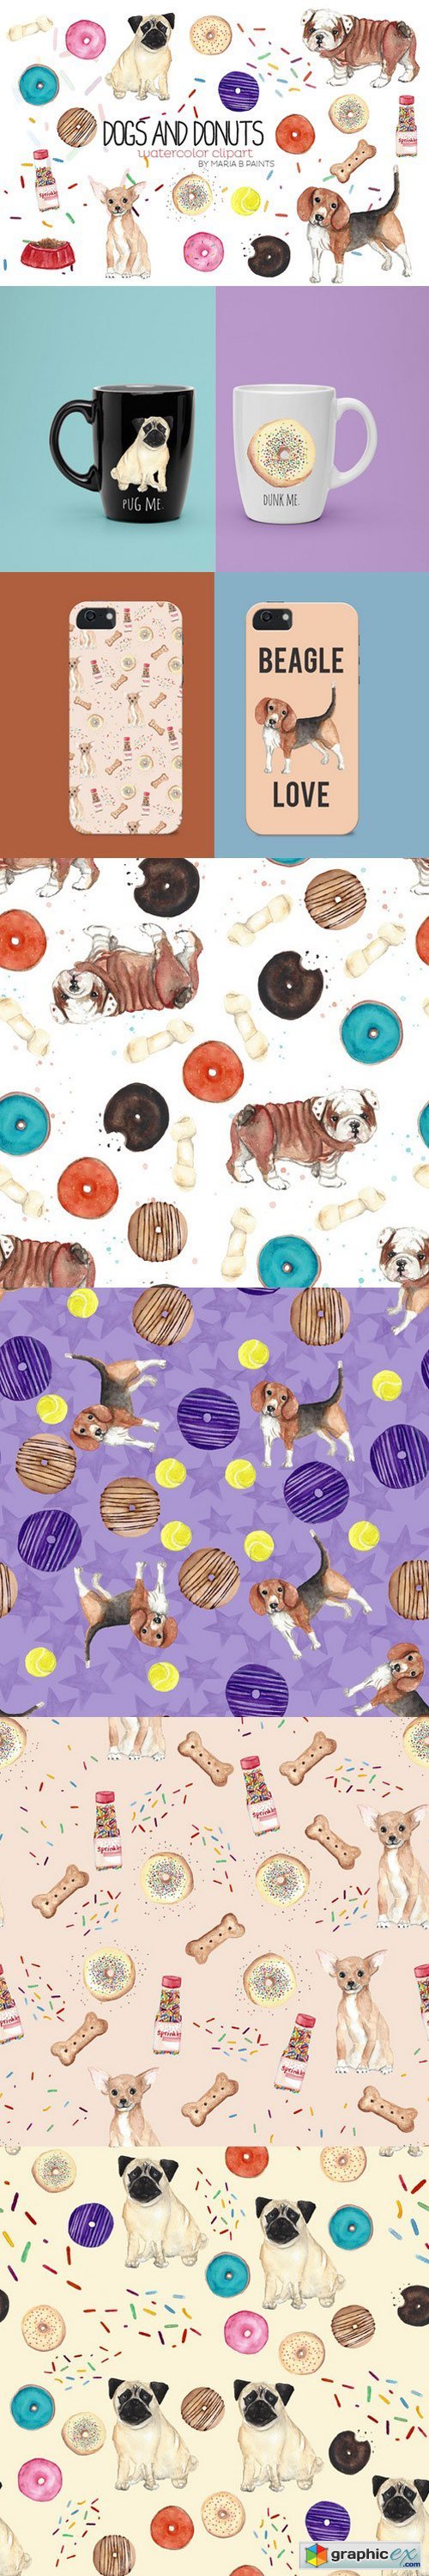 Watercolor Clip Art - Dogs n Donuts